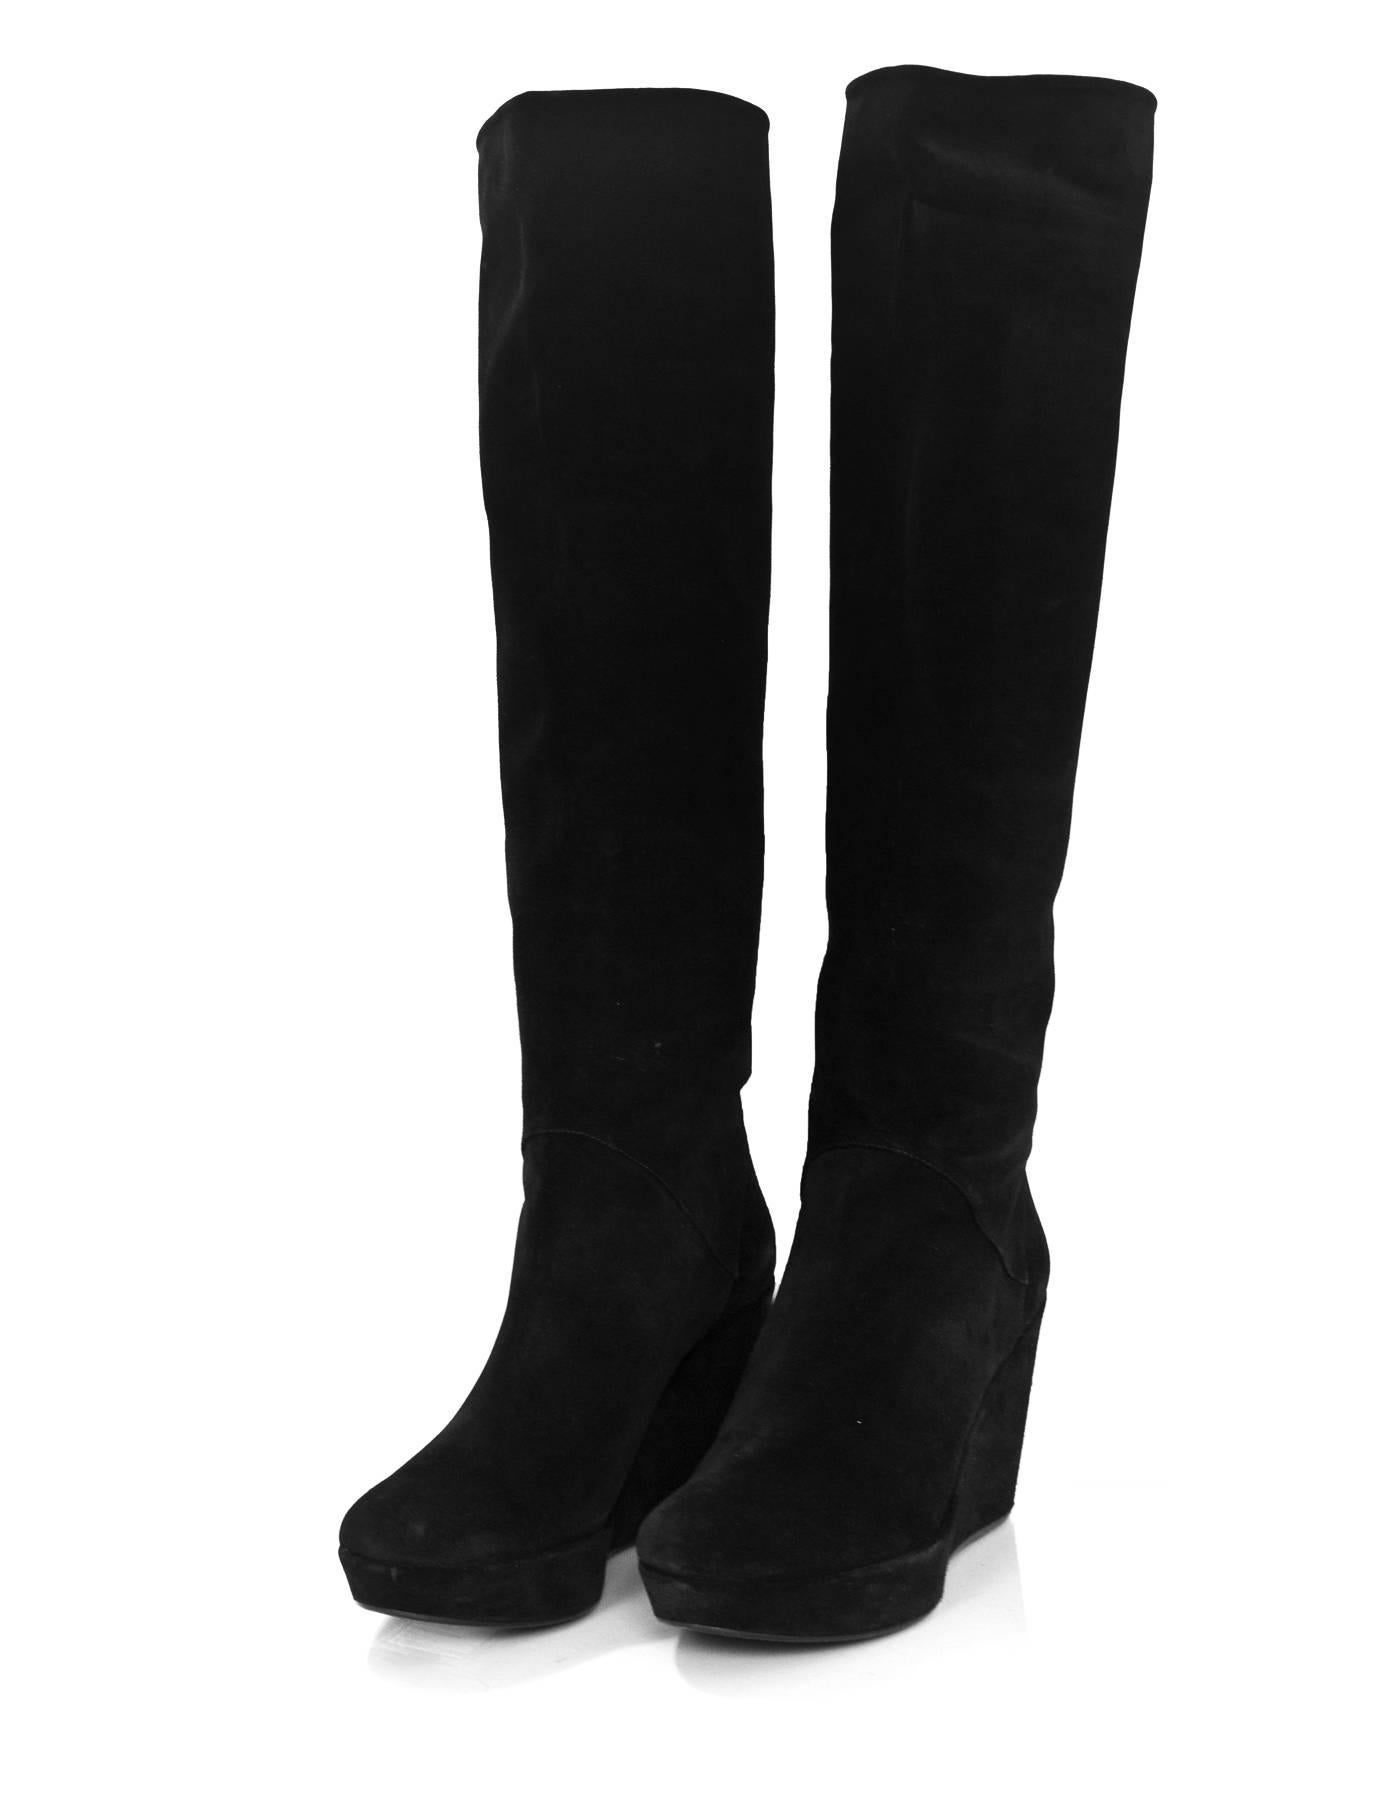 Stuart Weitzman Black Suede Nulinear Wedge Boots Sz 11

Made In: Spain
Color: Black
Materials: Suede
Closure/Opening: Pull on
Sole Stamp: Made in Spain
Overall Condition: Excellent pre-owned condition
Includes: Stuart Weitzman box
Marked Size: